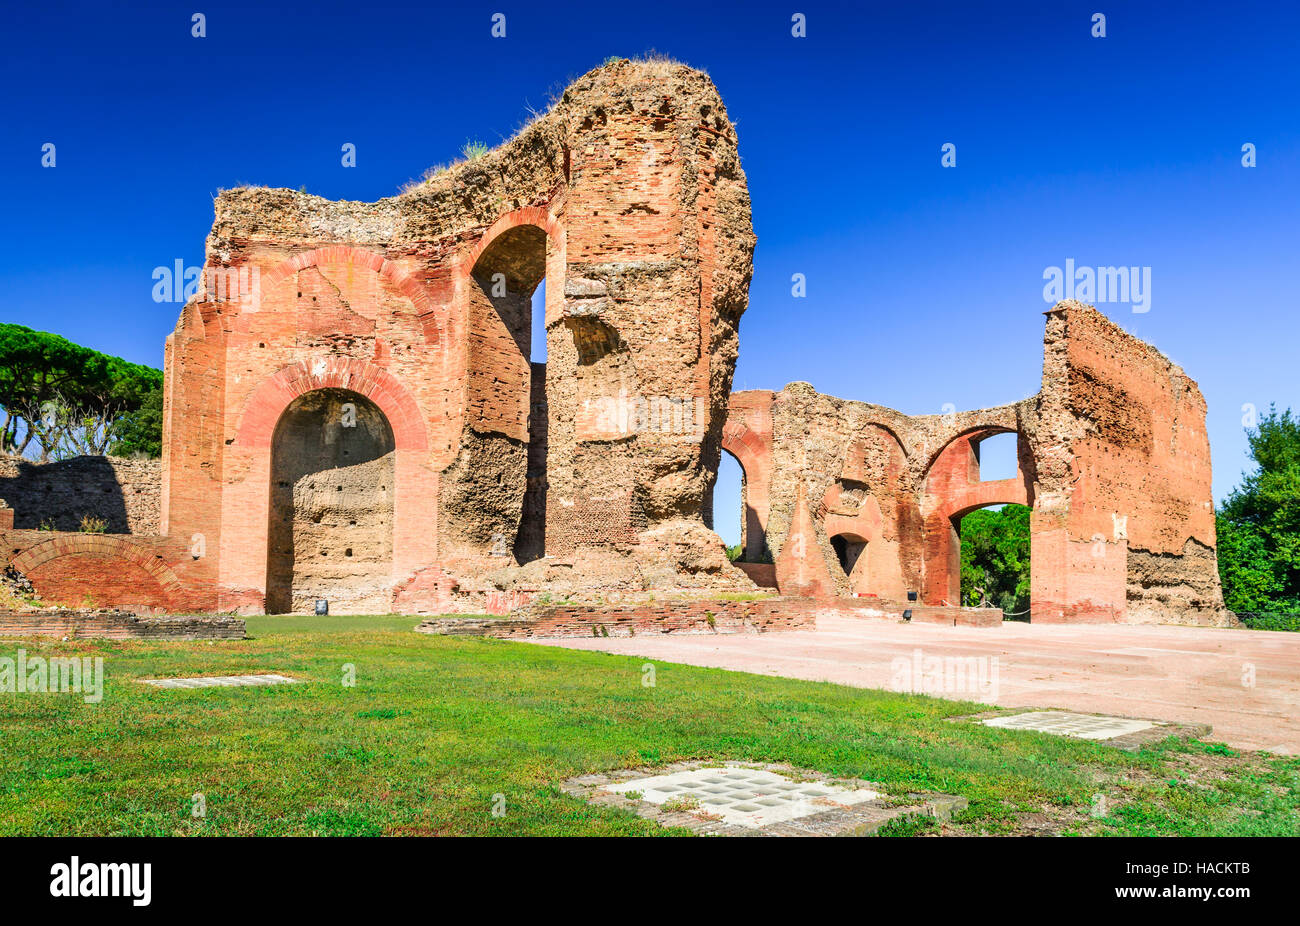 Rome, Italy. Baths of Caracalla, ancient ruins of roman public thermae built by Emperor Caracalla, between 212 and 216AD. Stock Photo